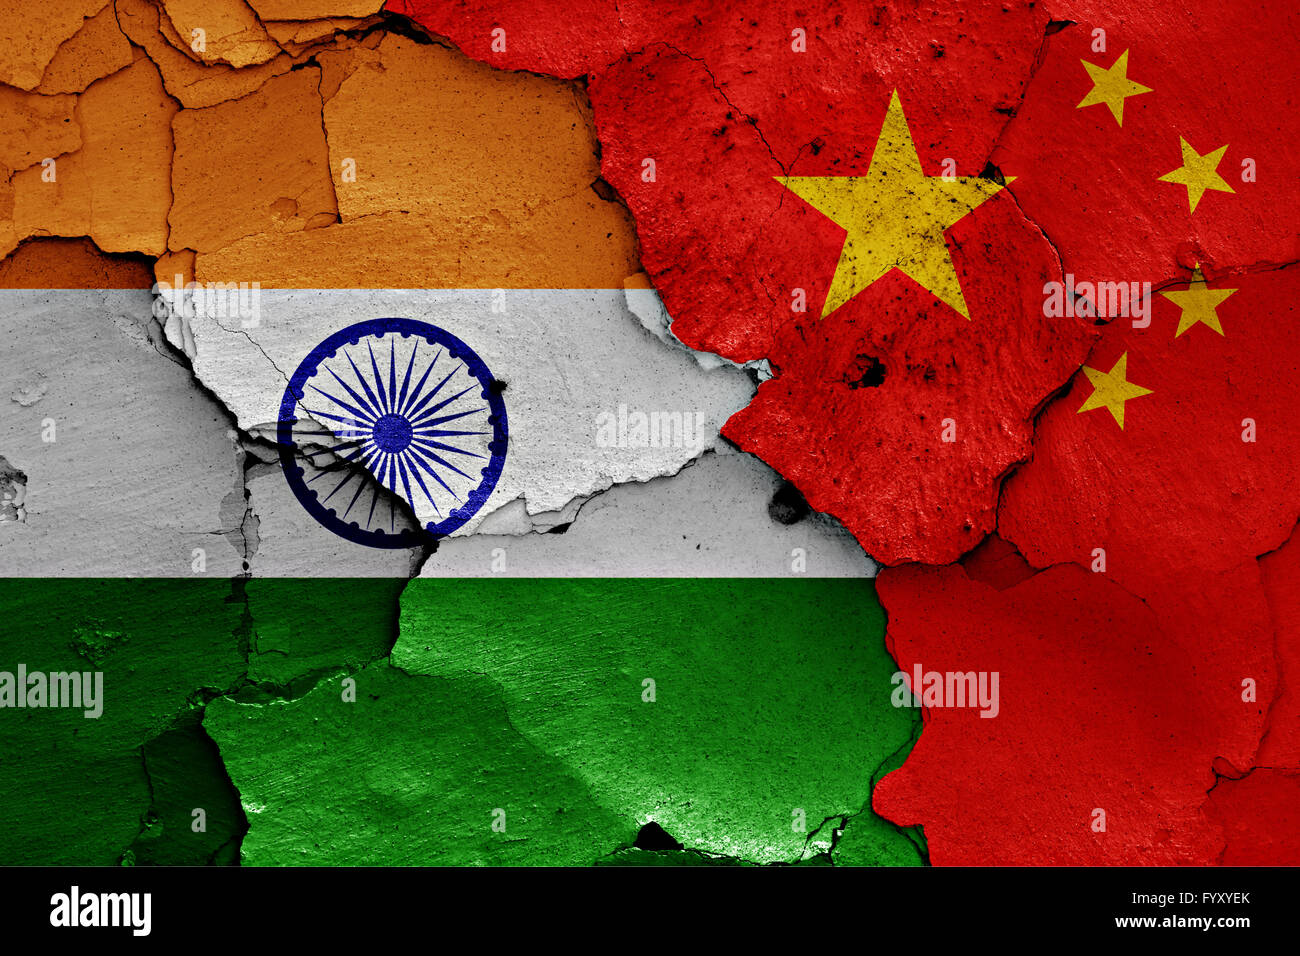 flags of India and China painted on cracked wall Stock Photo